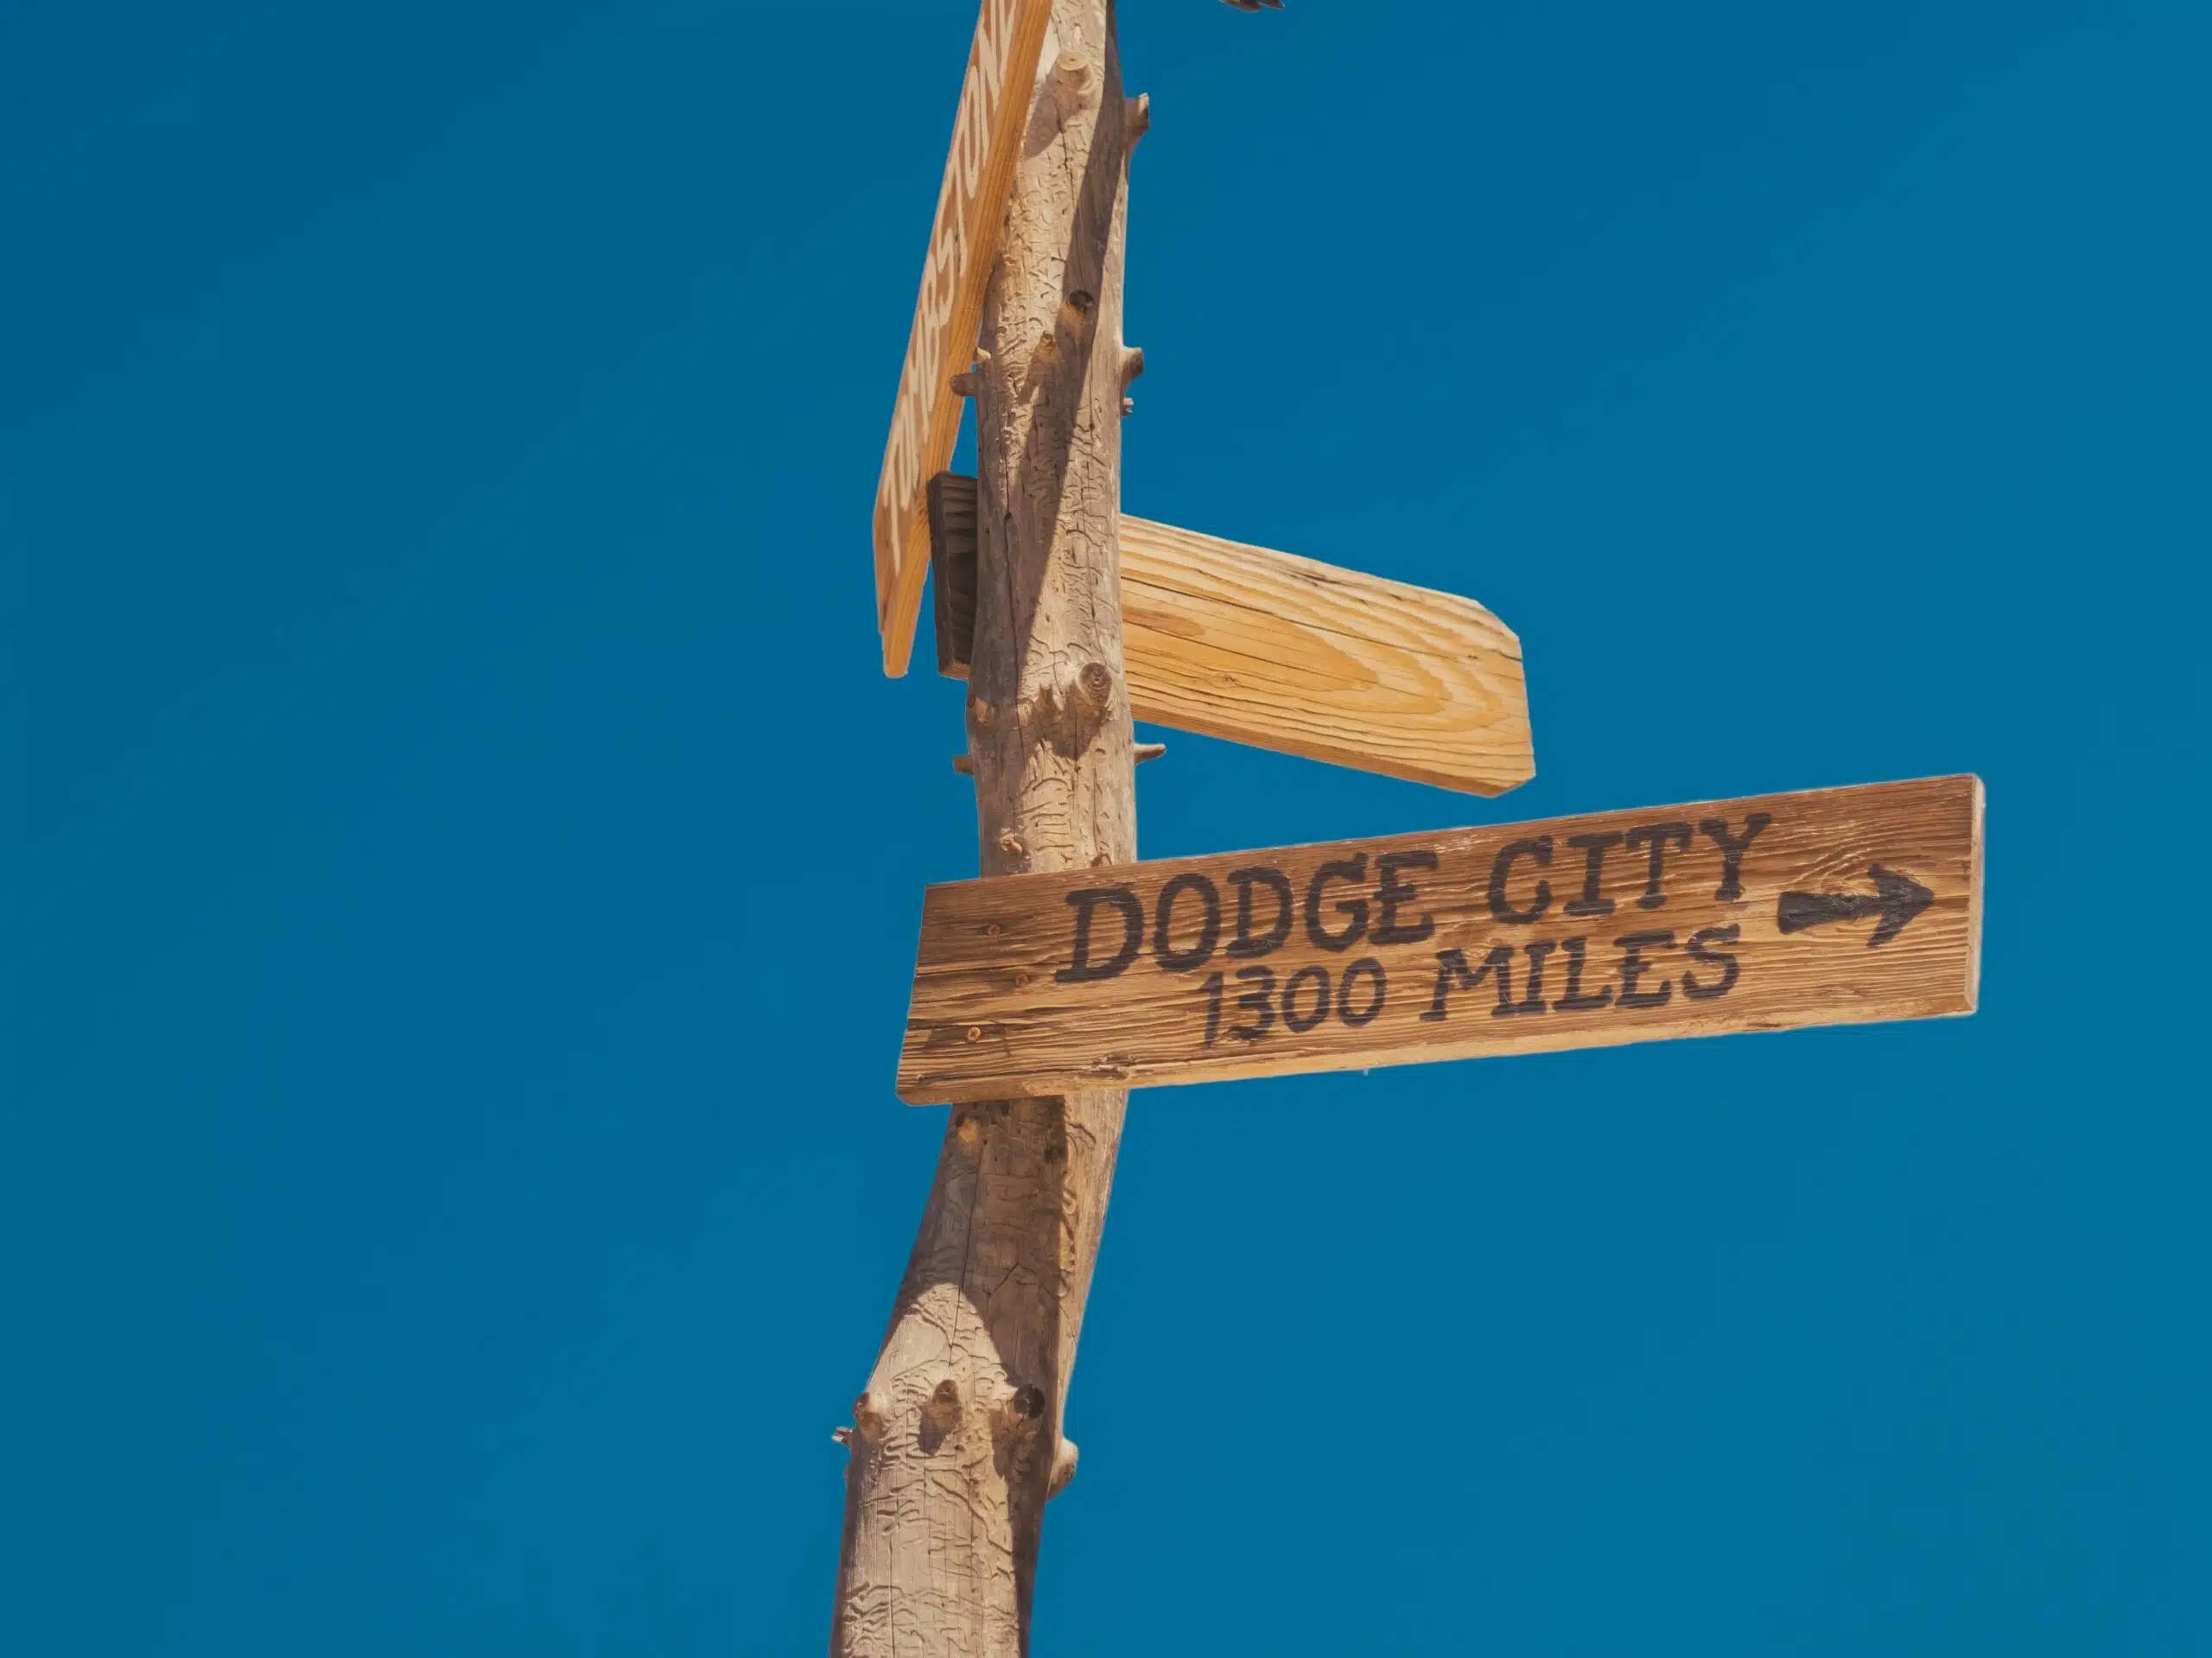 A sign to Dodge City